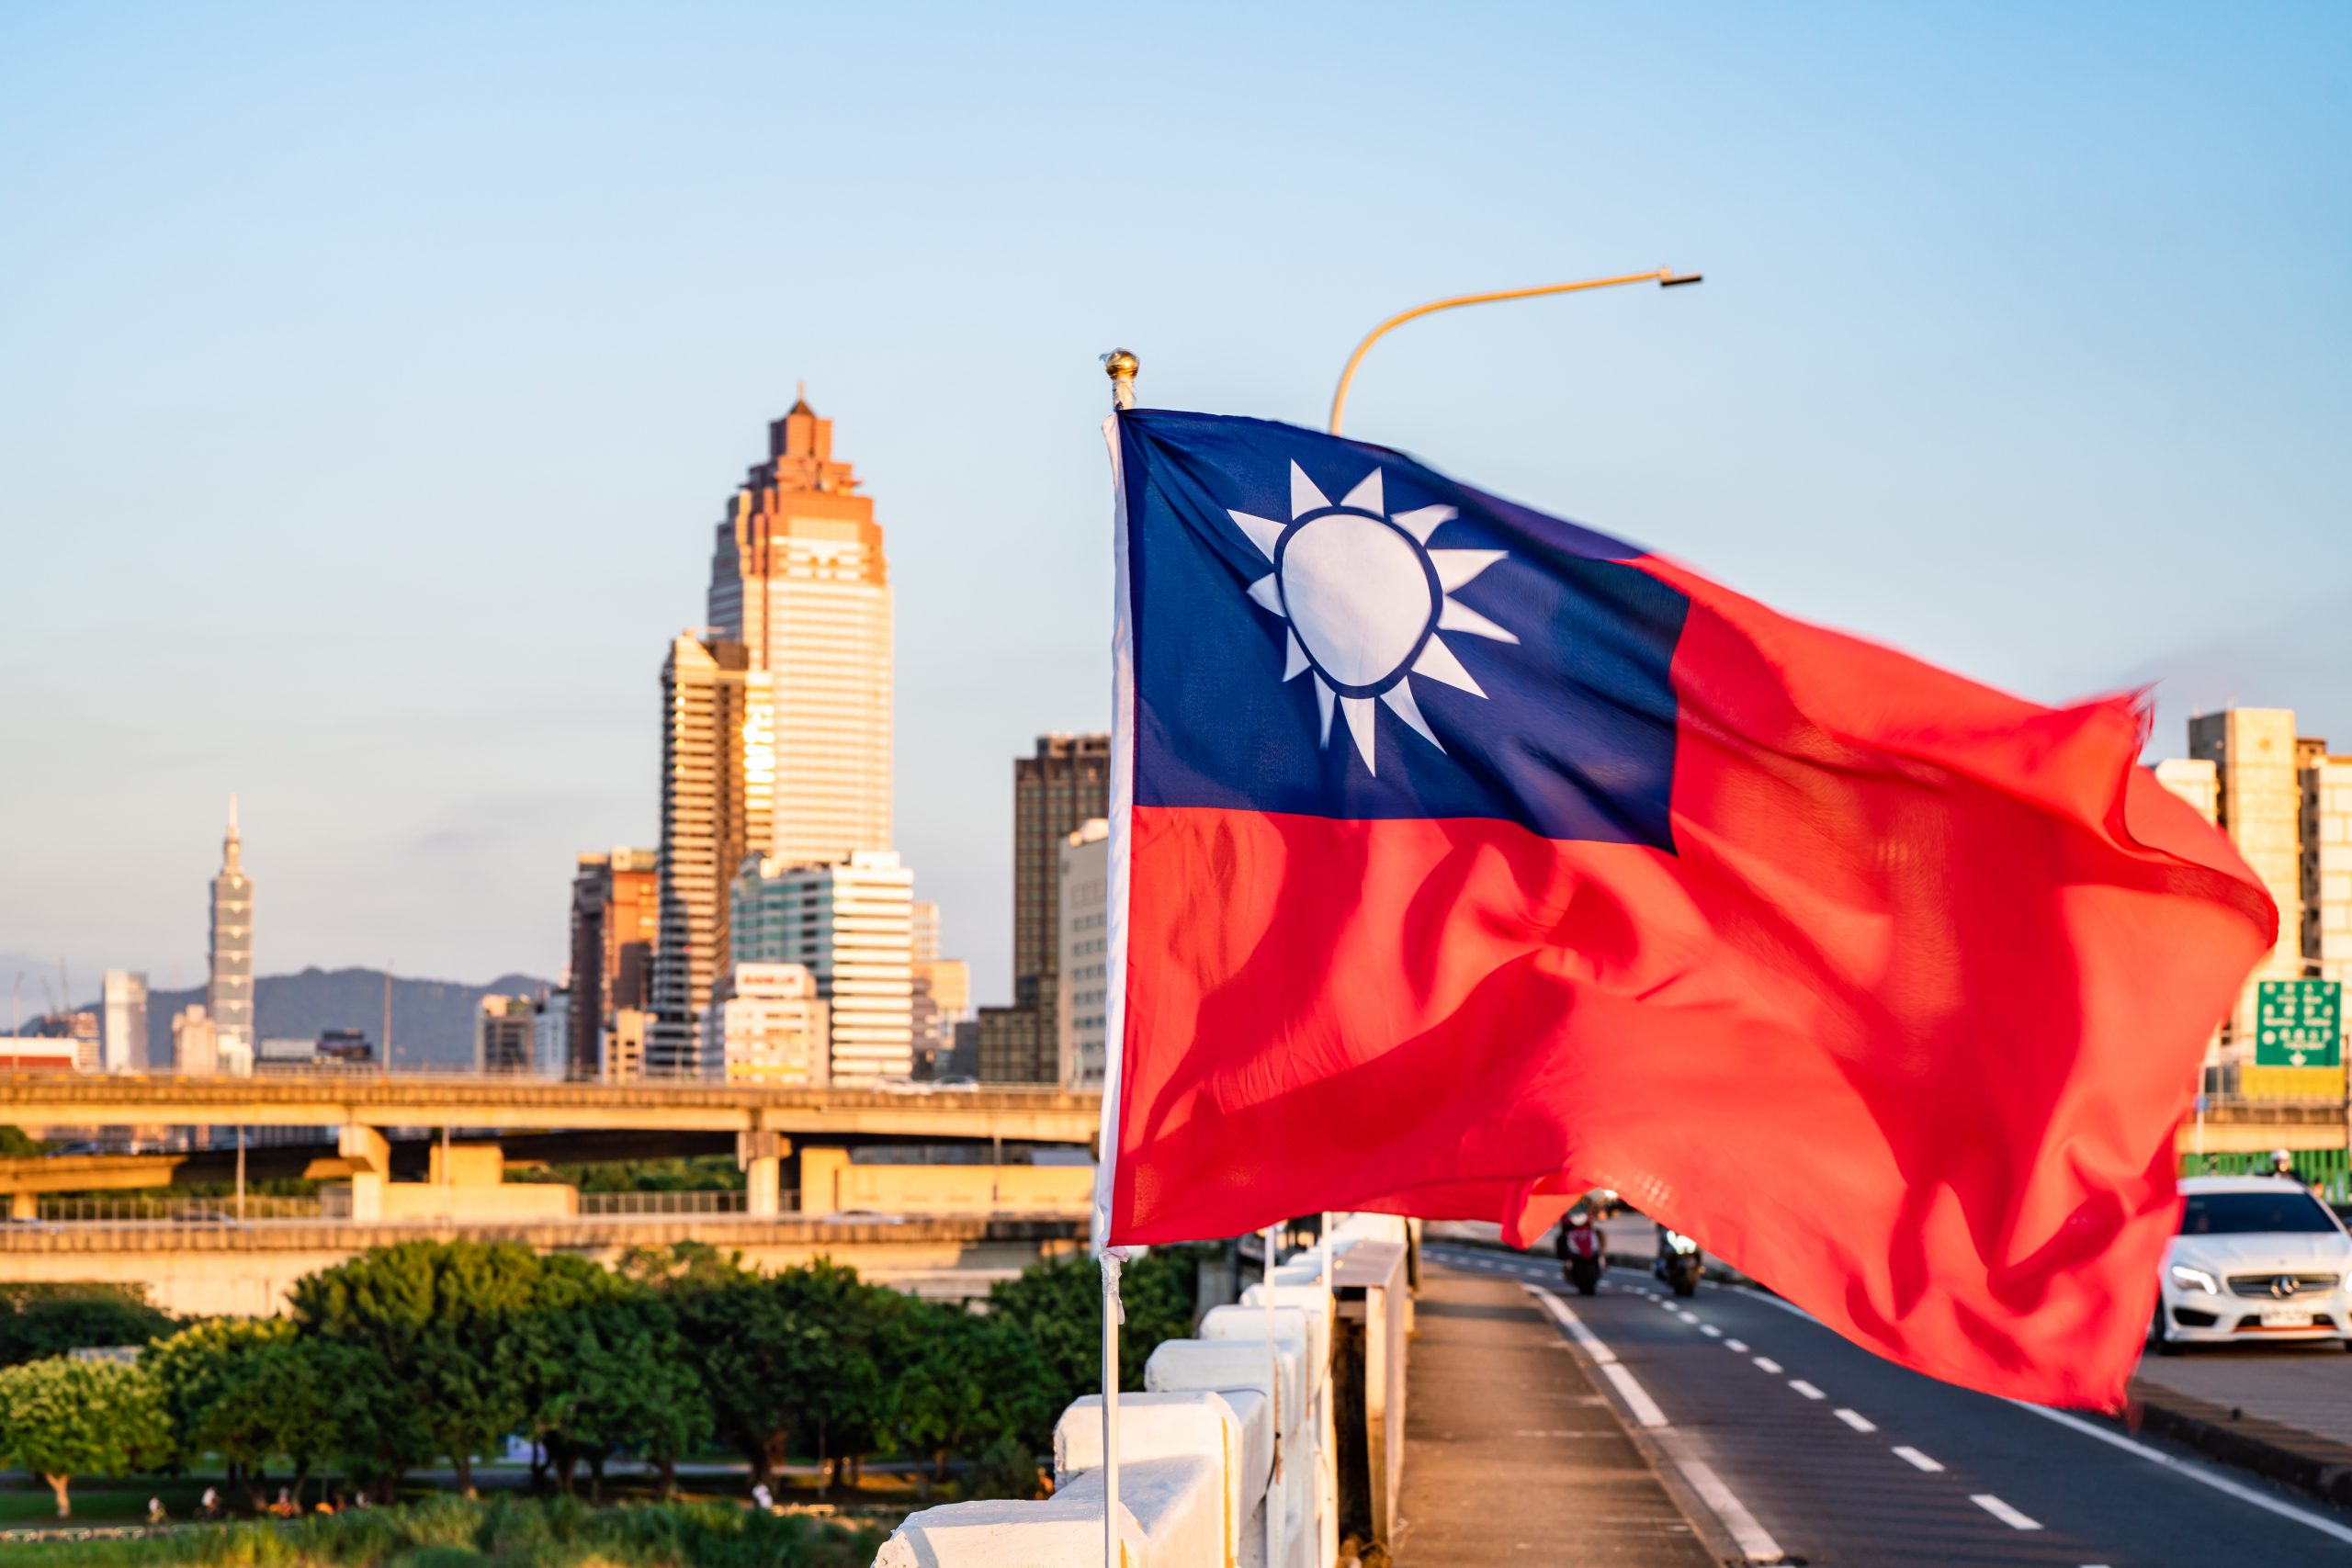 Taiwan uses Ethereum IPFS technology to counter Chinese cyber-attacks
